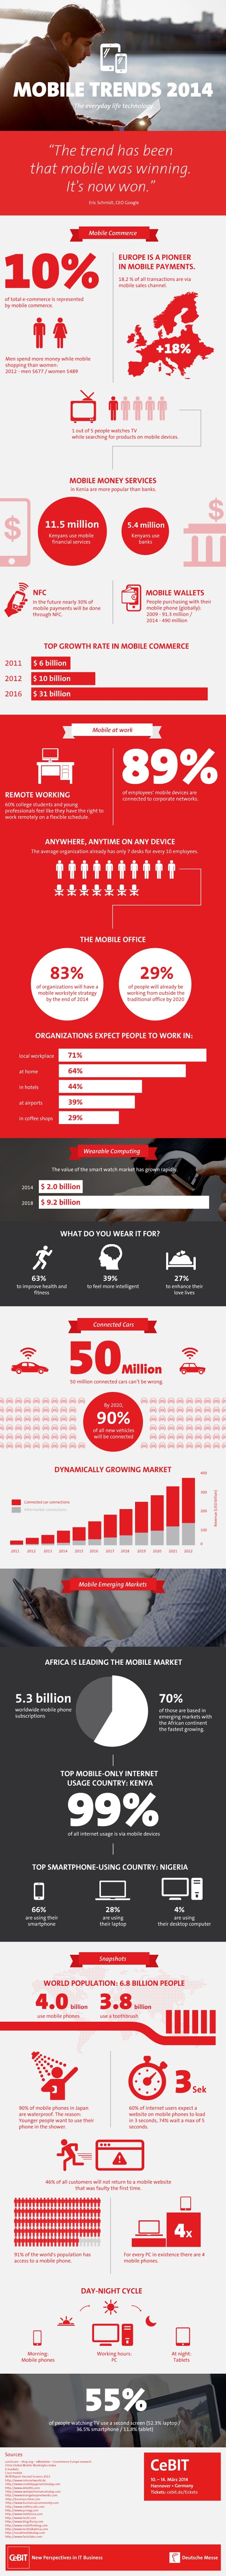 Infographic: Mobile Trends 2014 The Everyday Life Technology